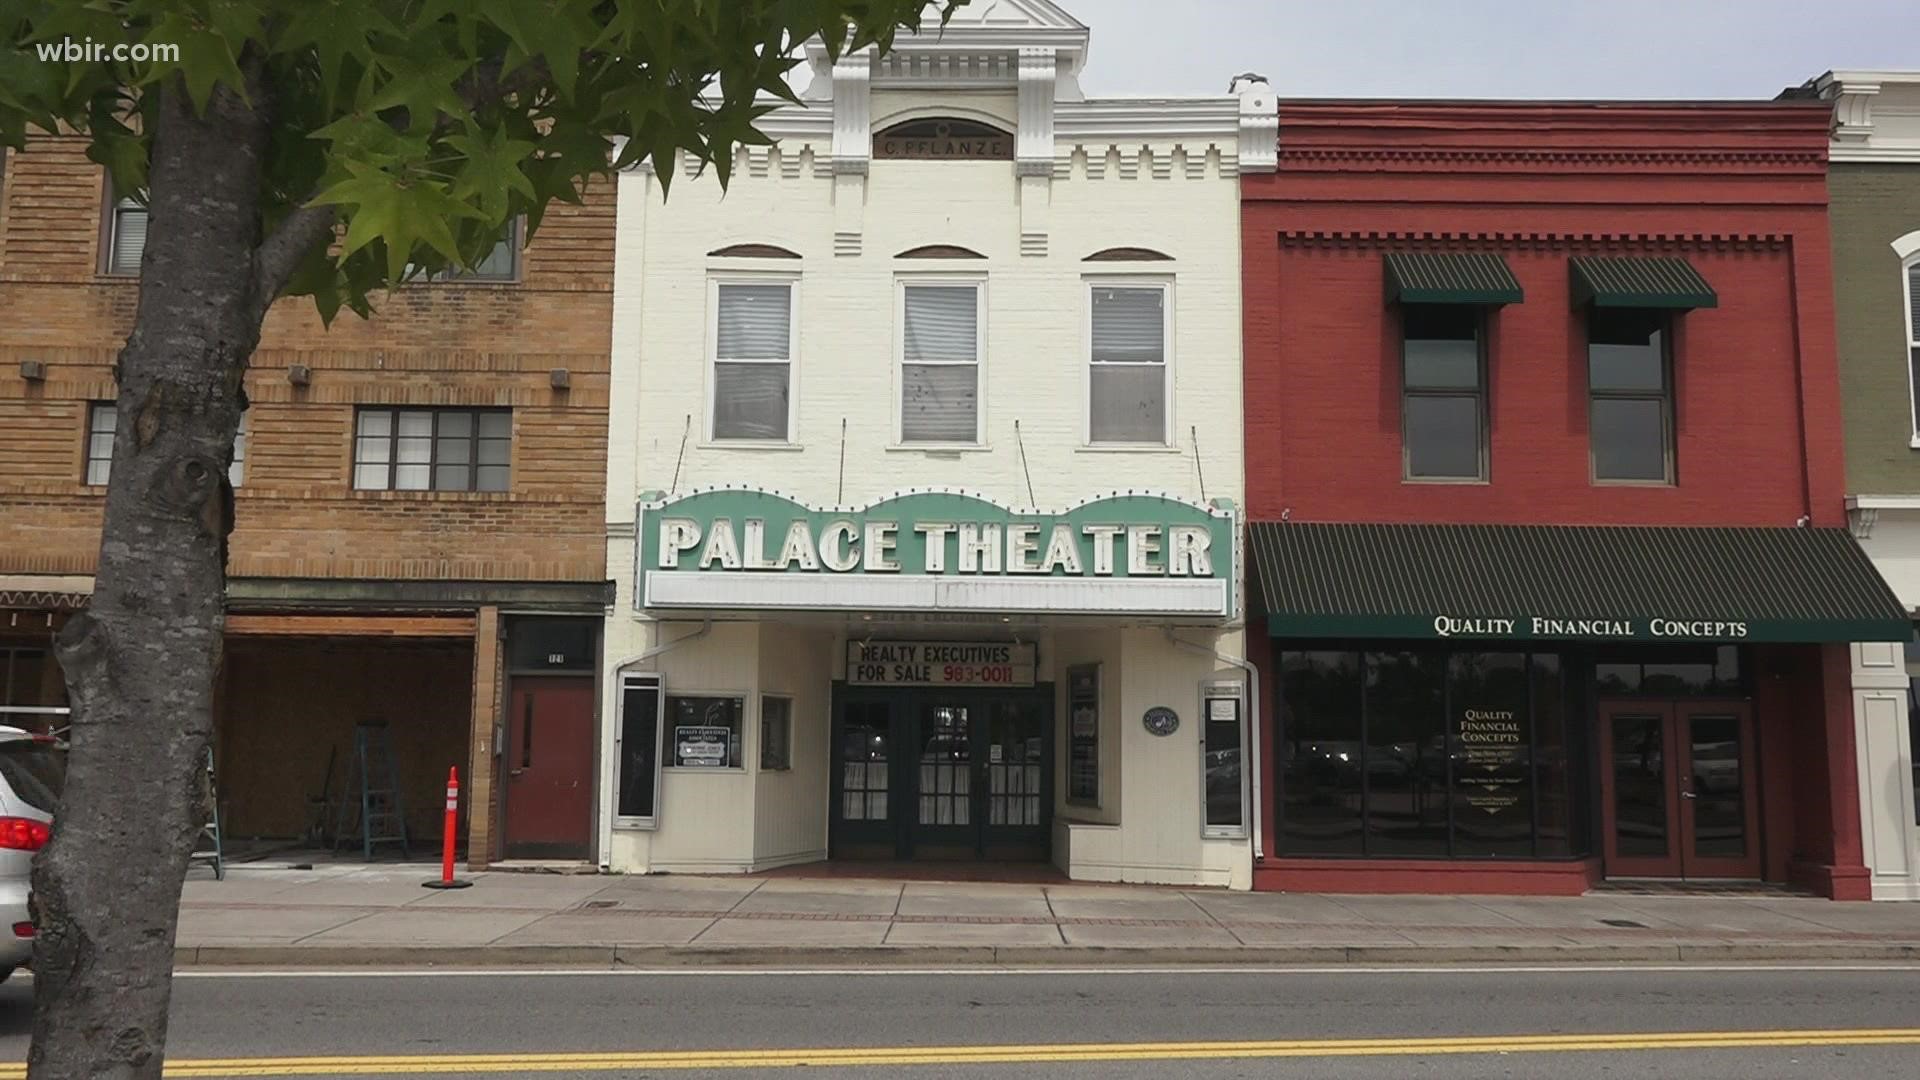 The Palace Theater started as a cabinet shot, transitioned into a movie theater, then found its place as an event space. Now, it's for sale to breathe new life.